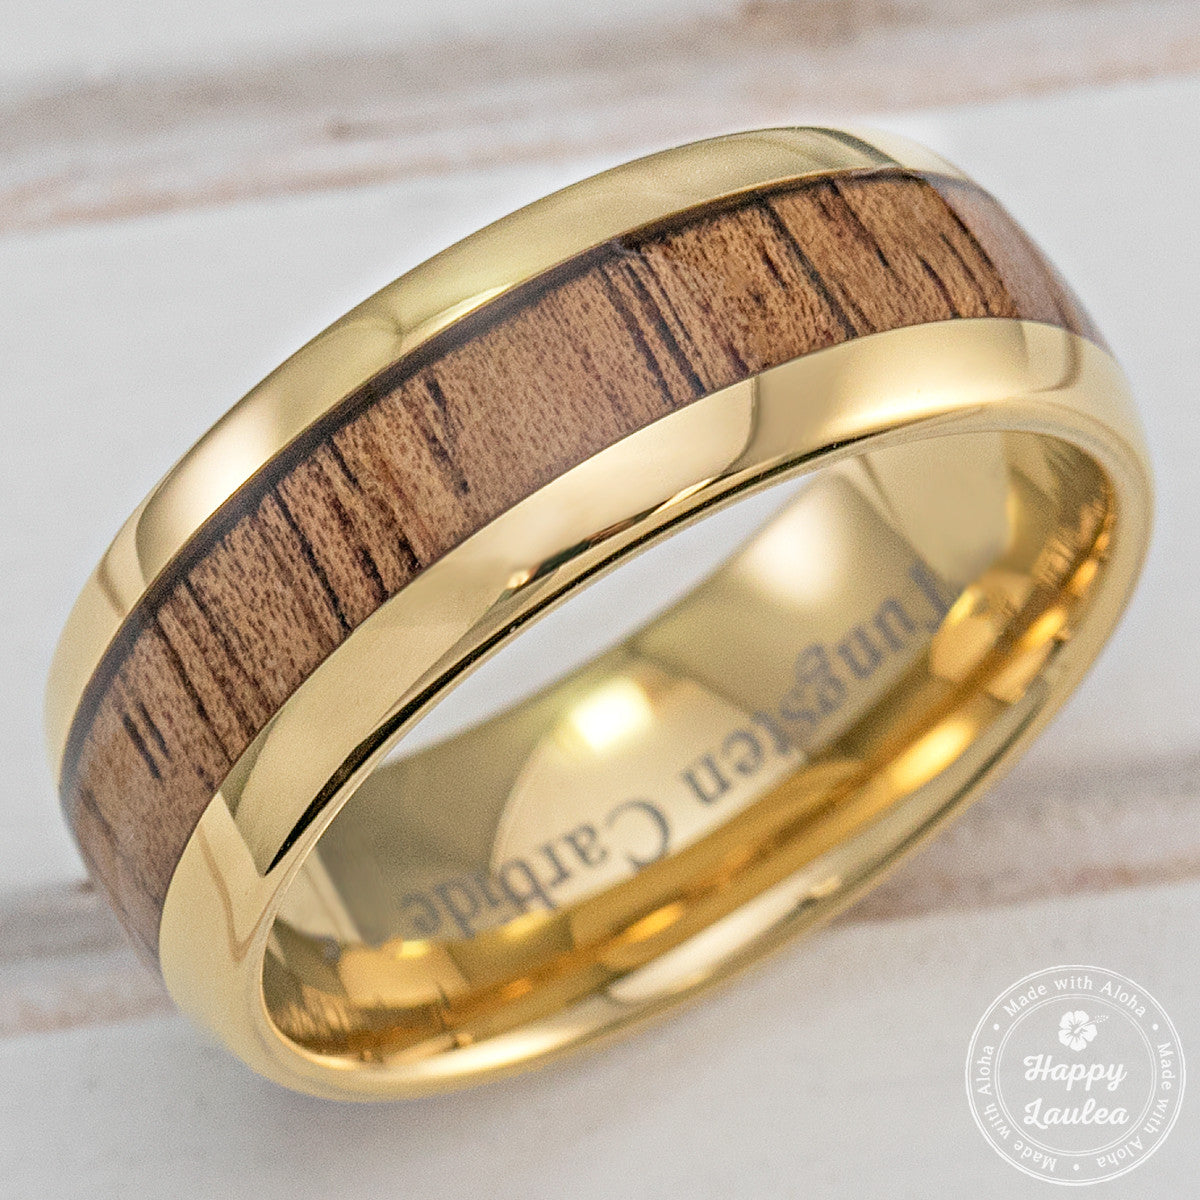 Tungsten Carbide Gold Plated Ring with Koa Wood Inlay - 8mm, Dome Shape, Comfort Fitment